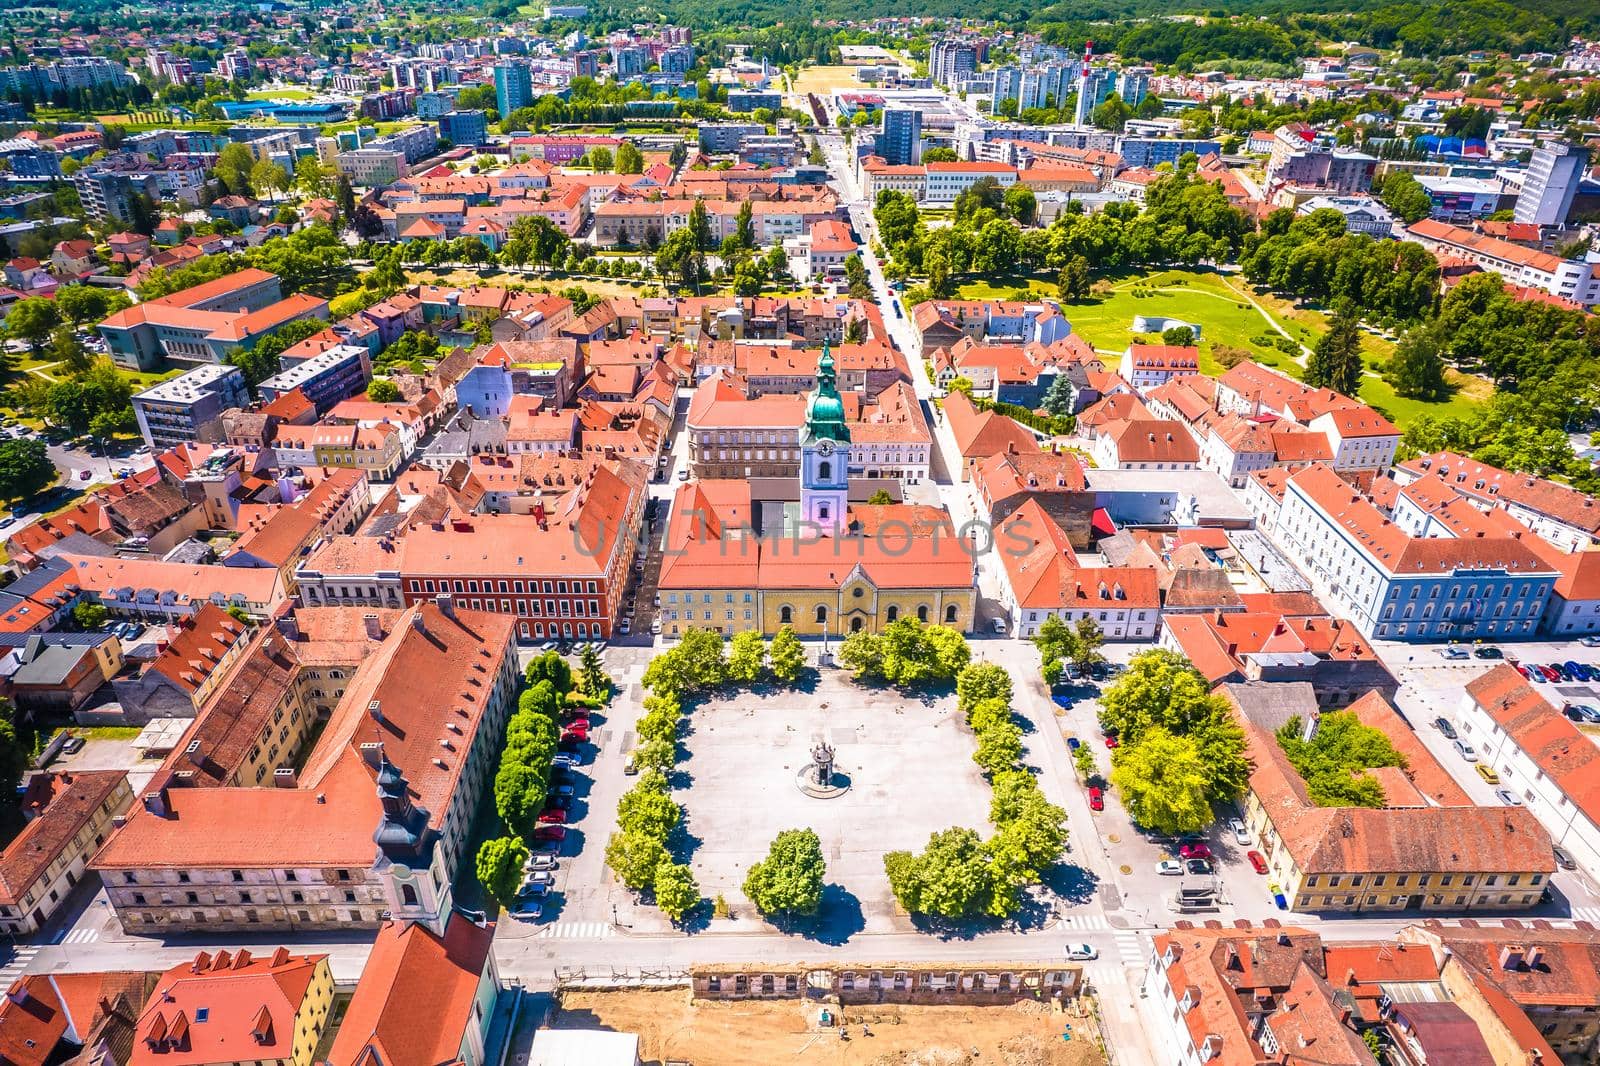 Town of Karlovac historic city center aerial view, central Croatia